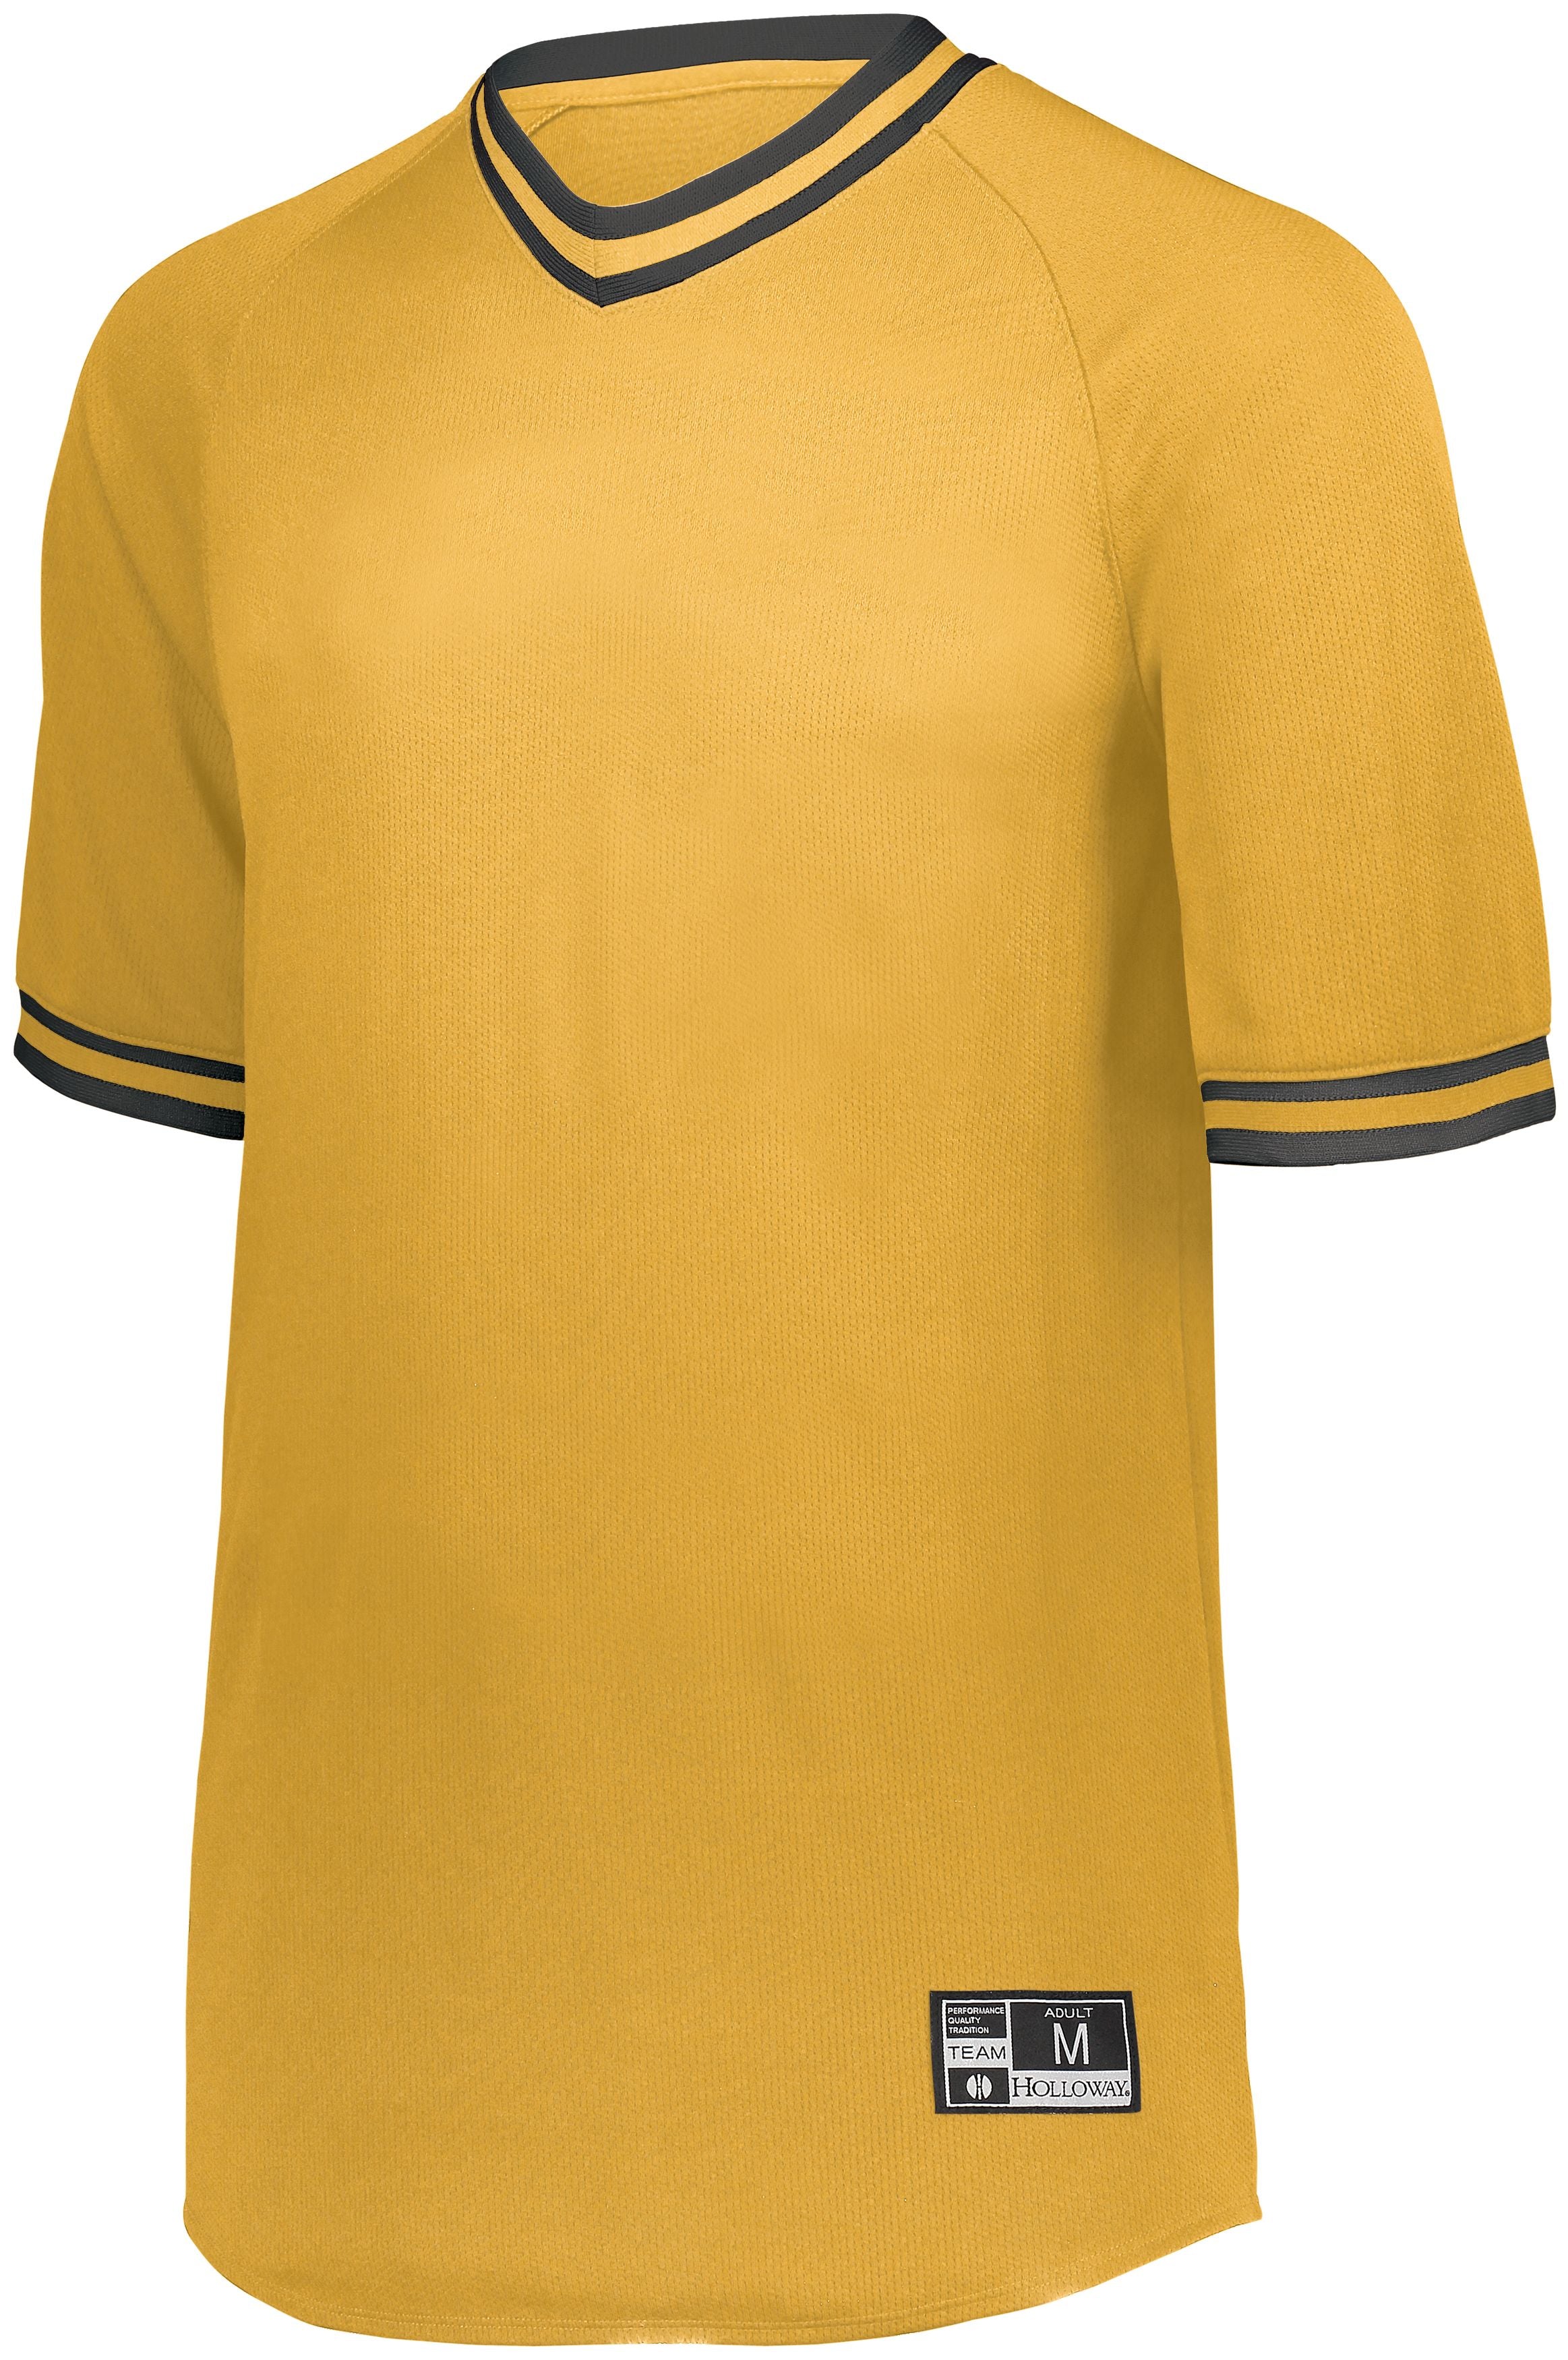 Holloway Retro V-Neck Baseball Jersey in Light Gold/Black  -Part of the Adult, Adult-Jersey, Baseball, Holloway, Shirts, All-Sports, All-Sports-1 product lines at KanaleyCreations.com